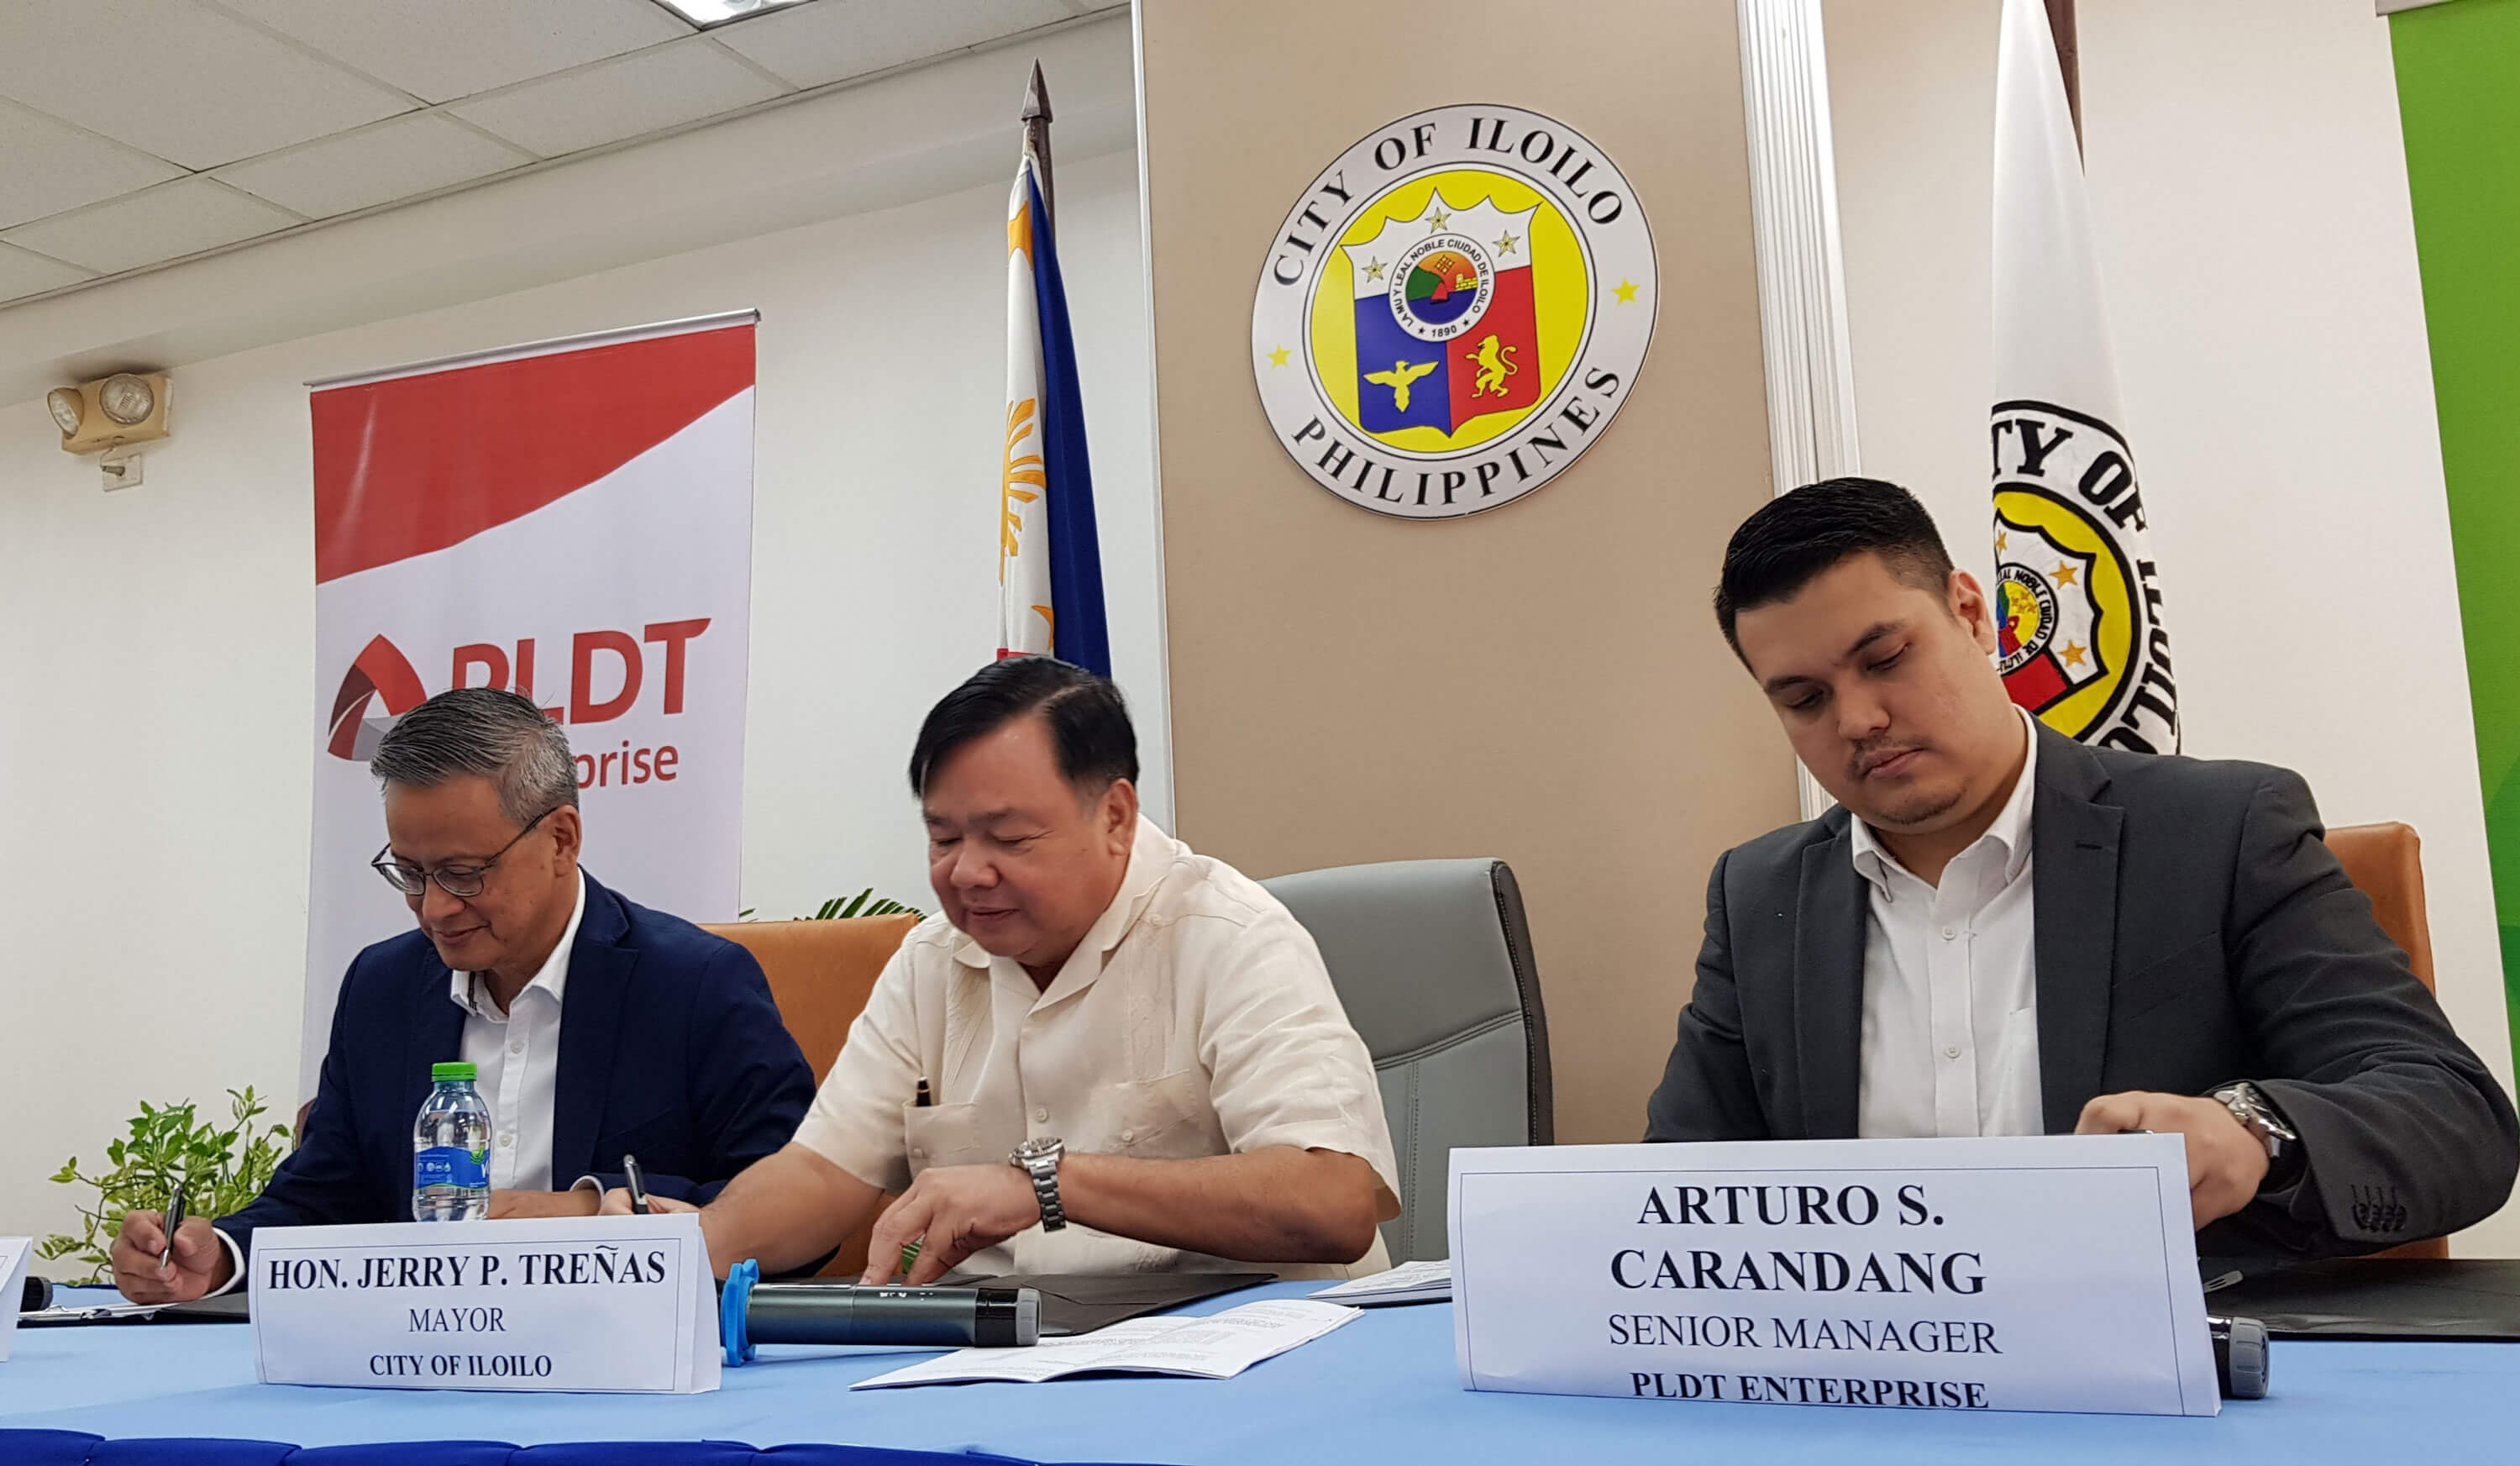 AGREEMENT. Mayor Jerry P. Treñas are joined by PLDT Enterprise One Visayas AVP and Head Jimmy V. Chua and PLDT Enterprise Senior Manager Arturo S. Carandang during the signing of the MOA for Google Station at the Iloilo City Hall.